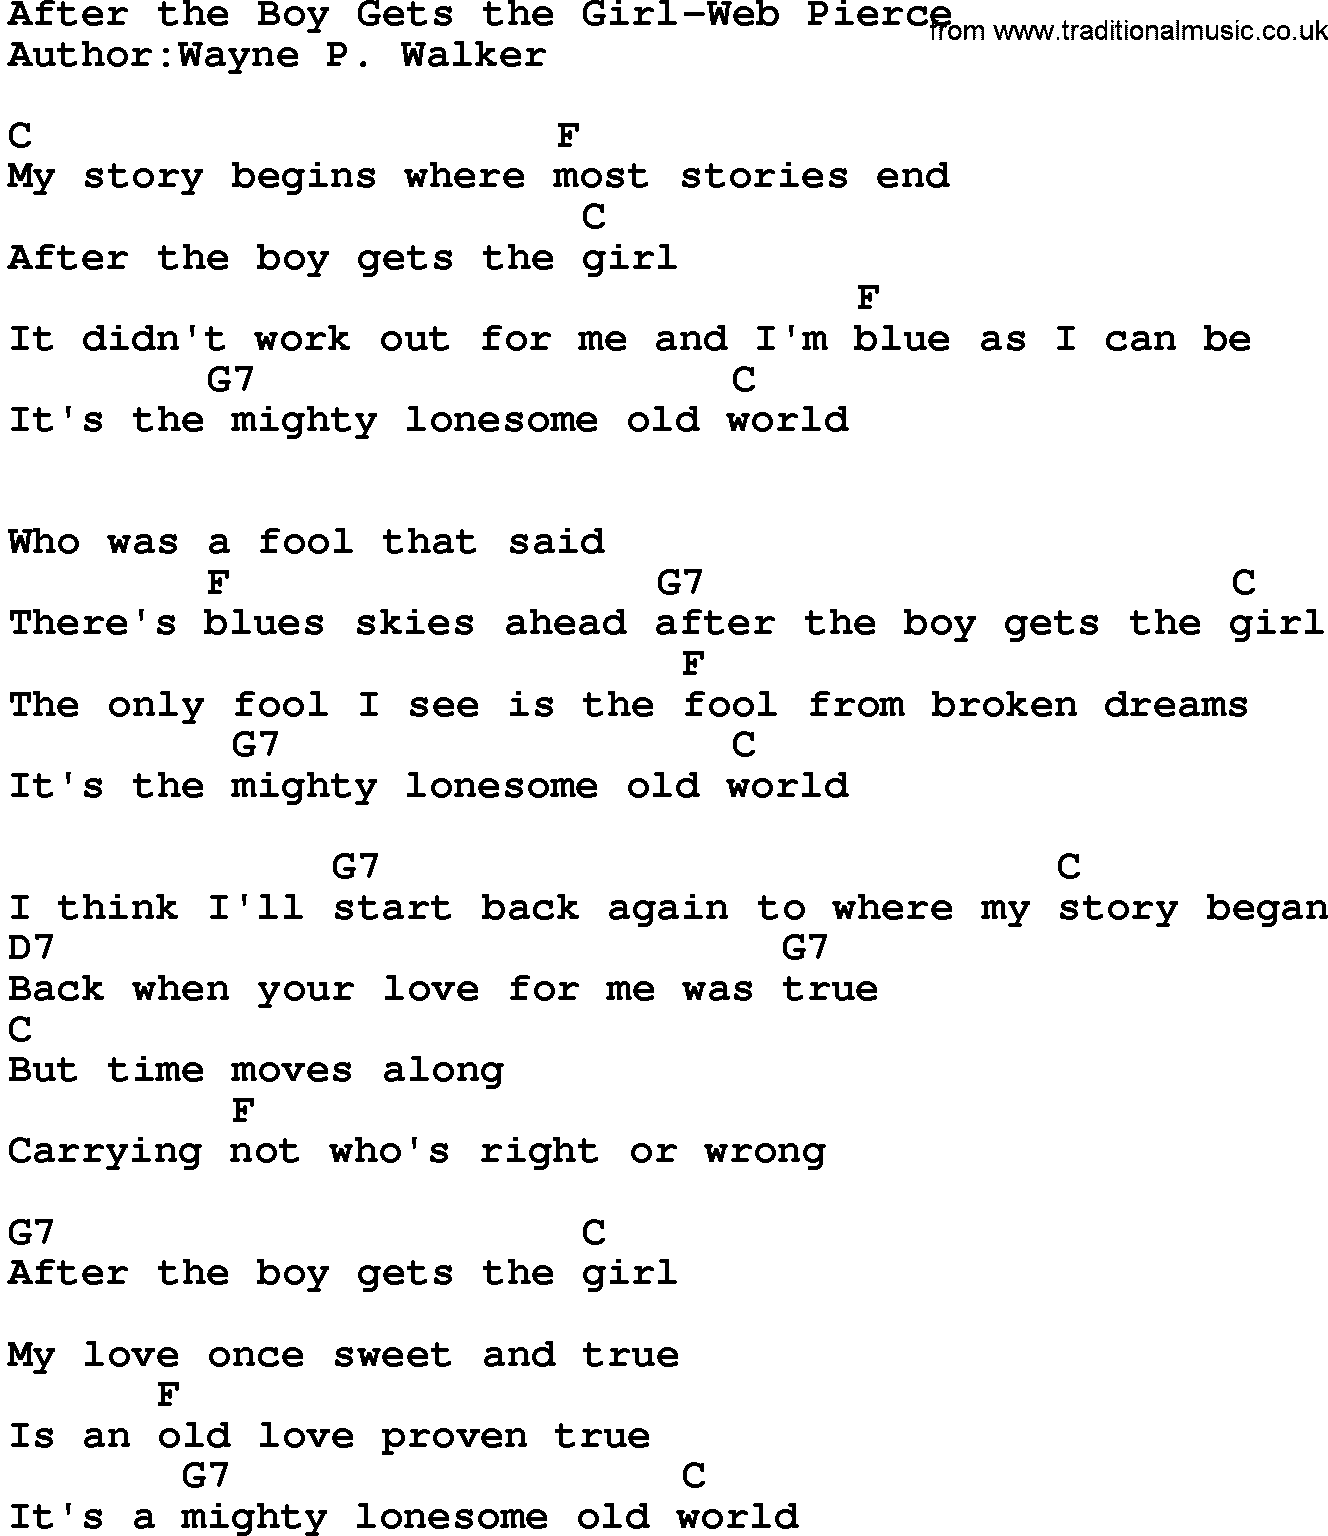 Country music song: After The Boy Gets The Girl-Web Pierce lyrics and chords